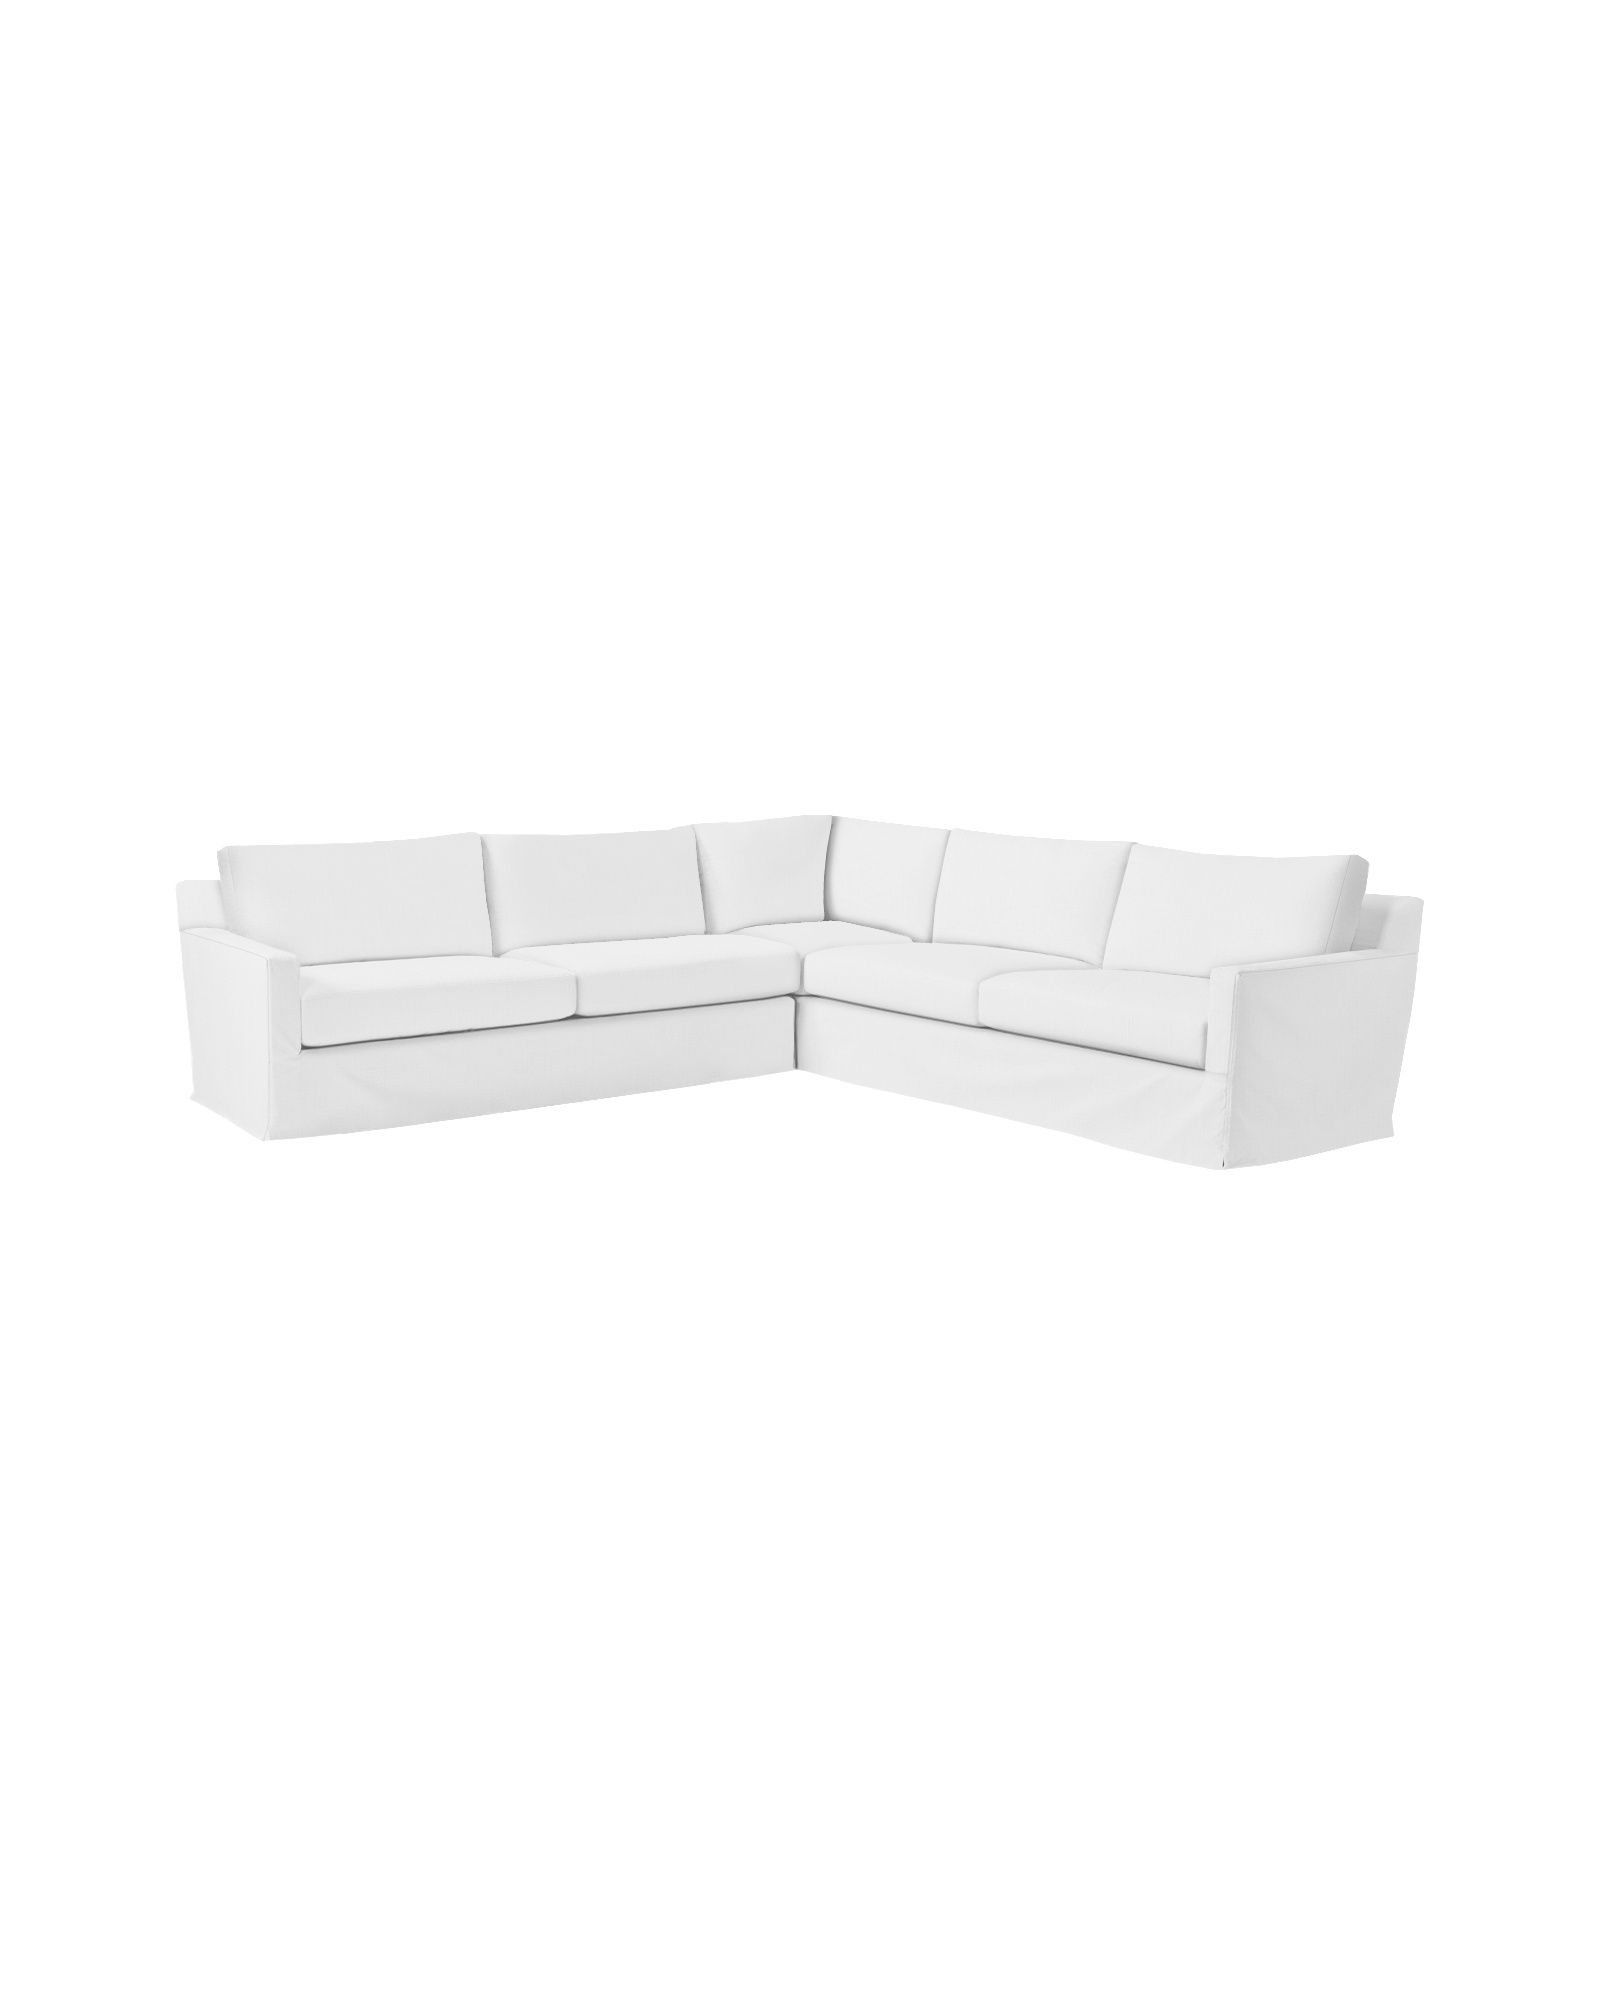 Summit Slipcovered L-Sectional - Left-Facing | Serena and Lily